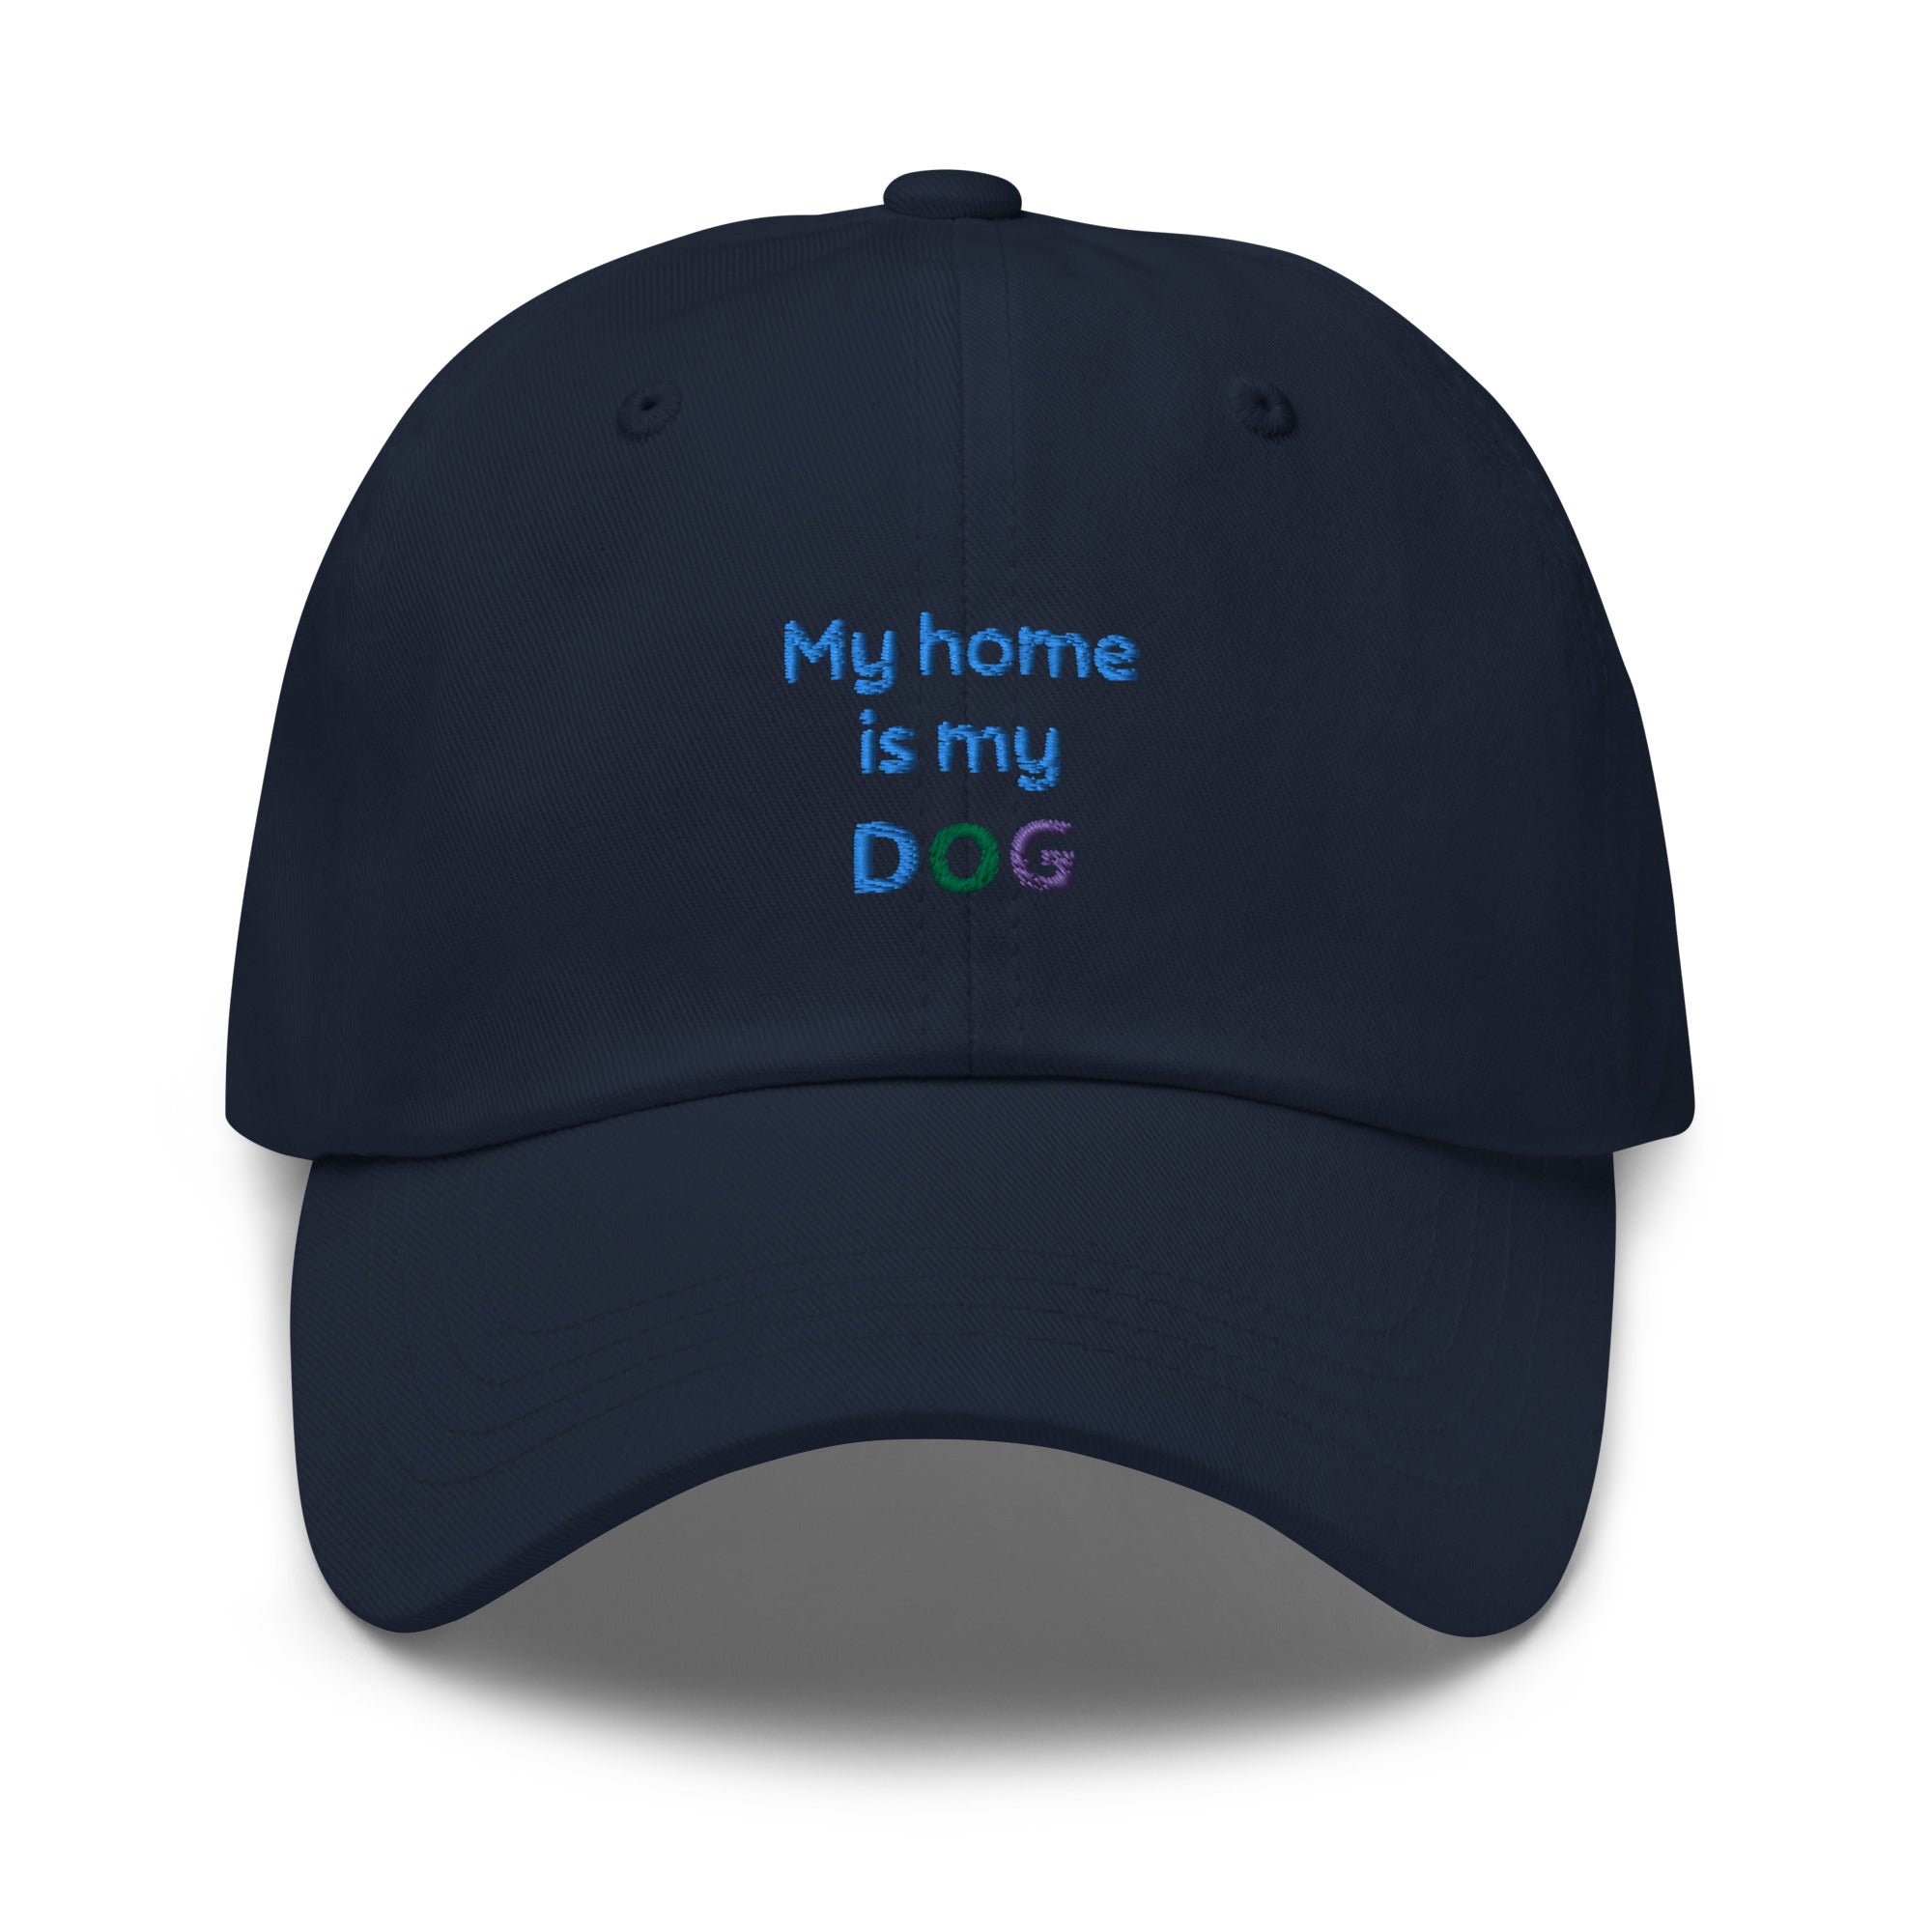 "My Home Is My Dog" Dad hat